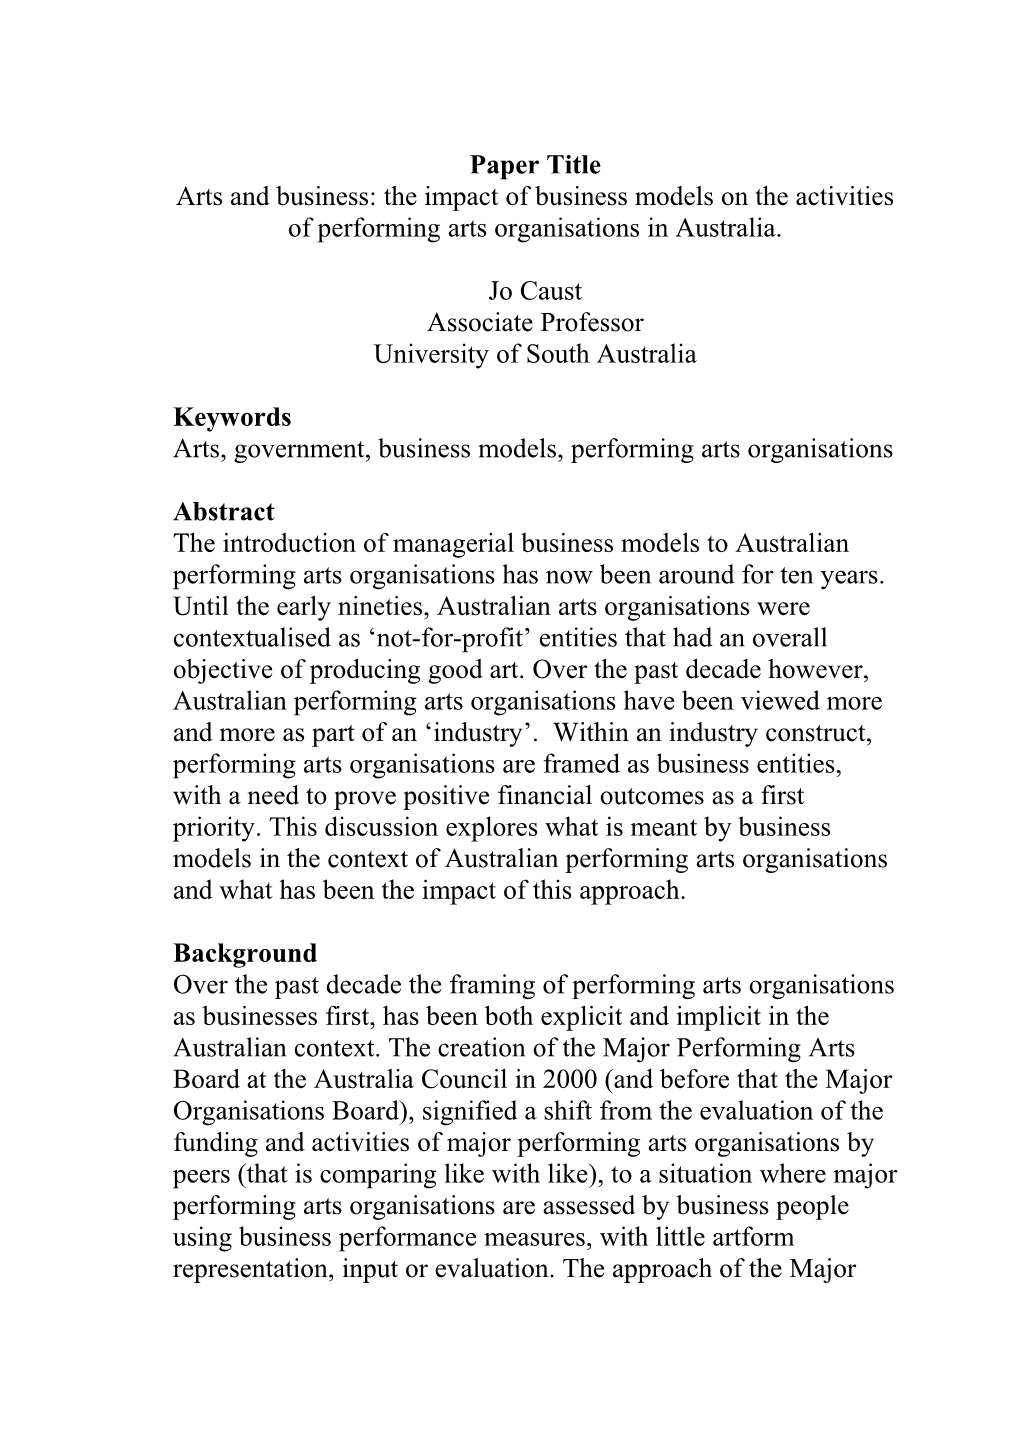 Arts and Business: the Impact of Business Models on the Activities of Performing Arts